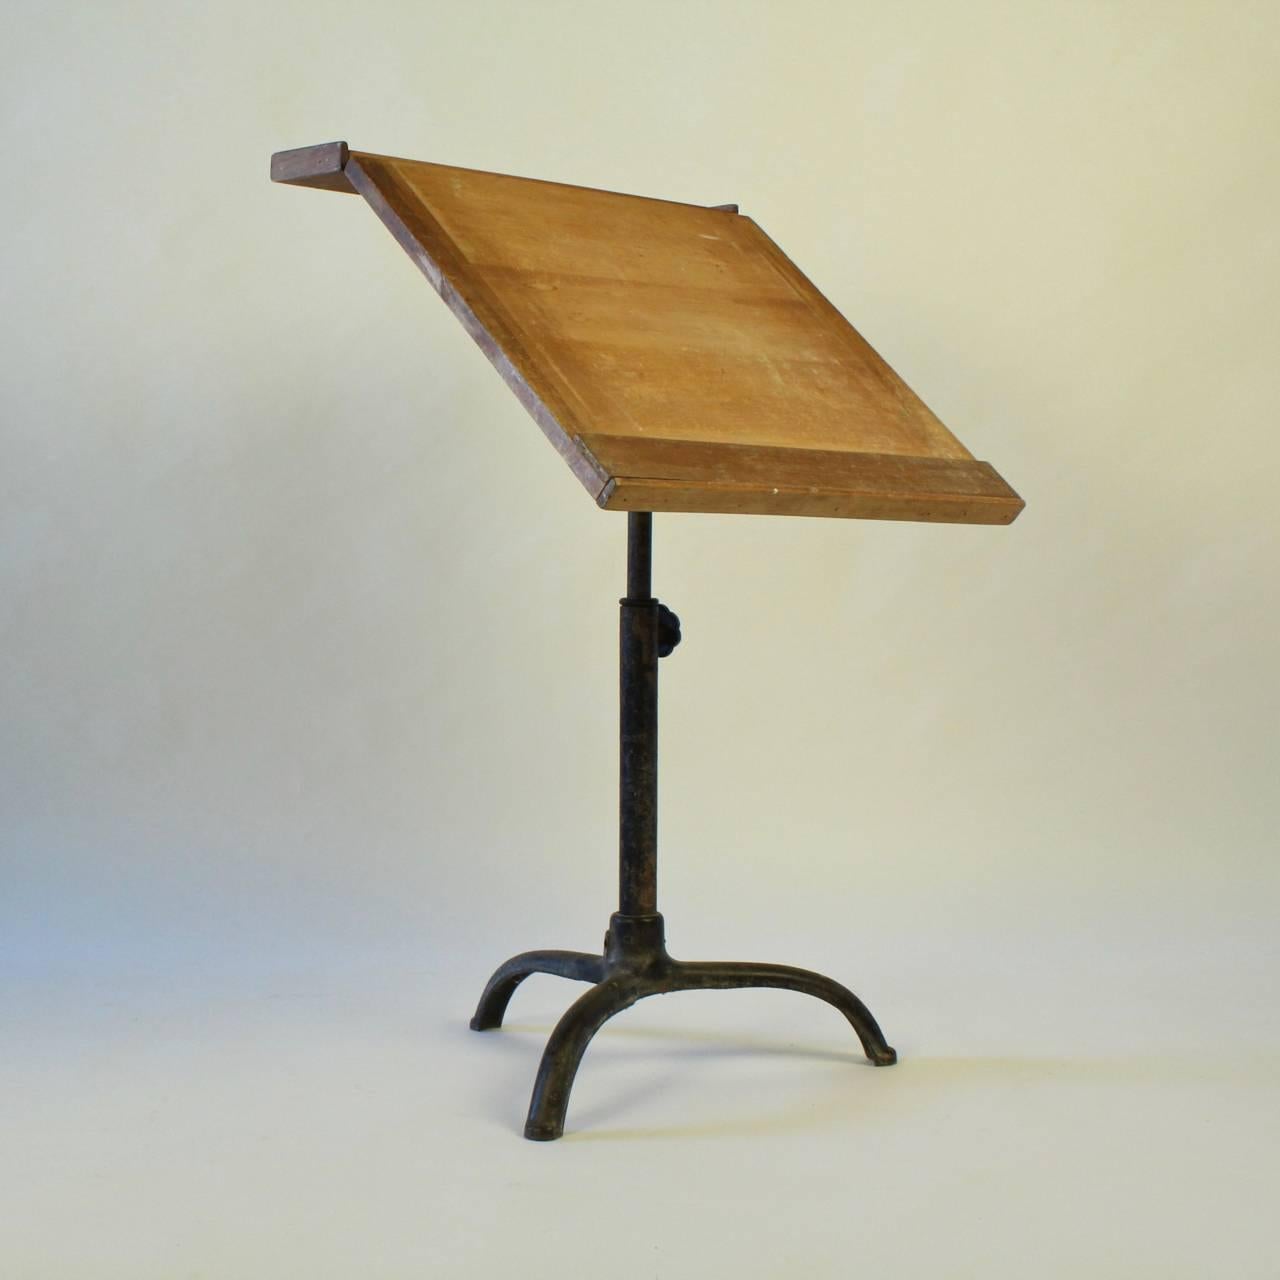 American Painted Cast Iron & Scrubbed-Top Pine Working Artist's Easel Table, 20th Century